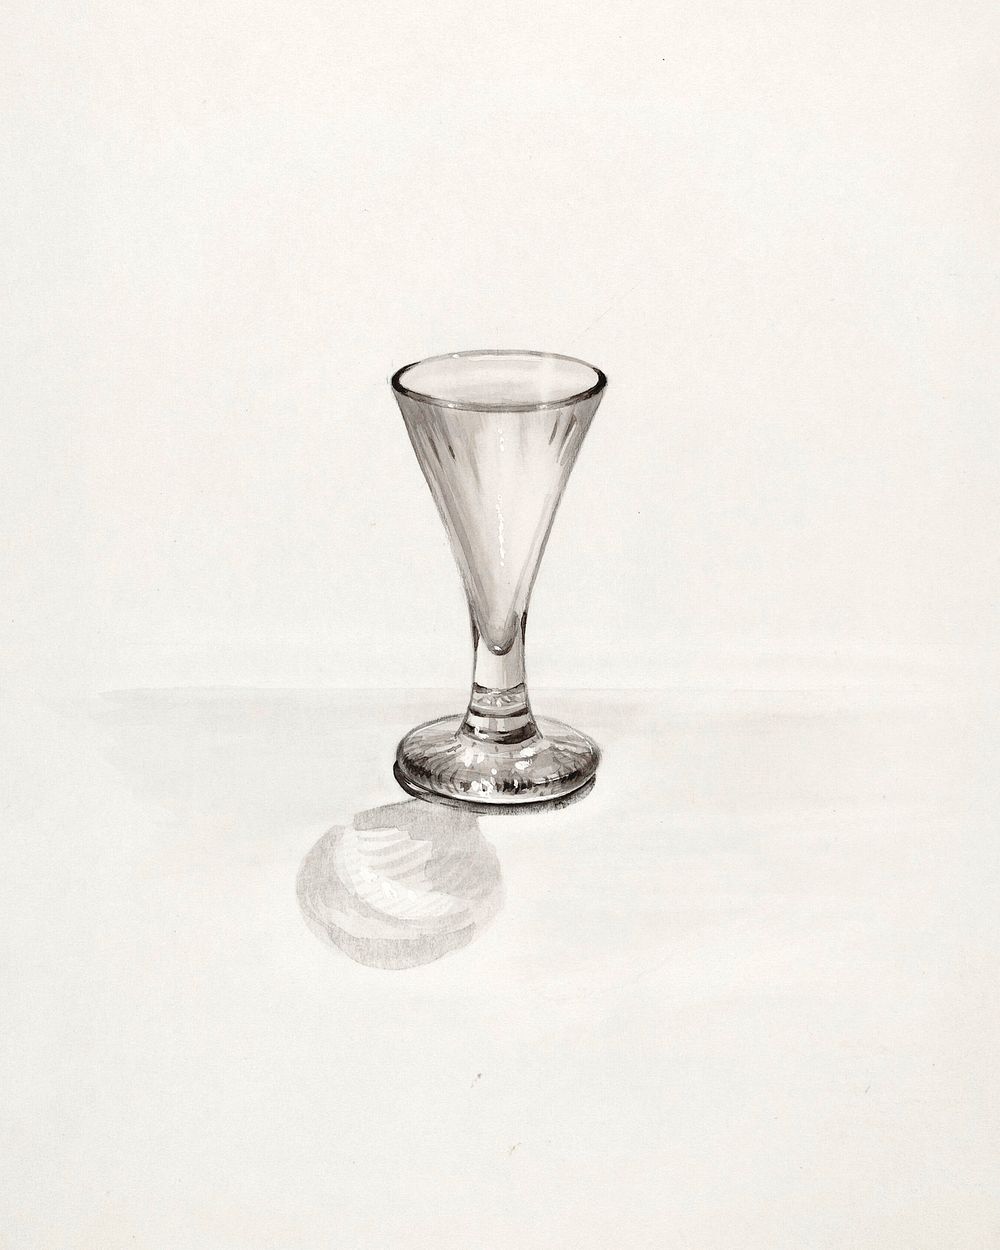 Cordial Glass (ca.1936) by John Tarantino. Original from The National Gallery of Art. Digitally enhanced by rawpixel.